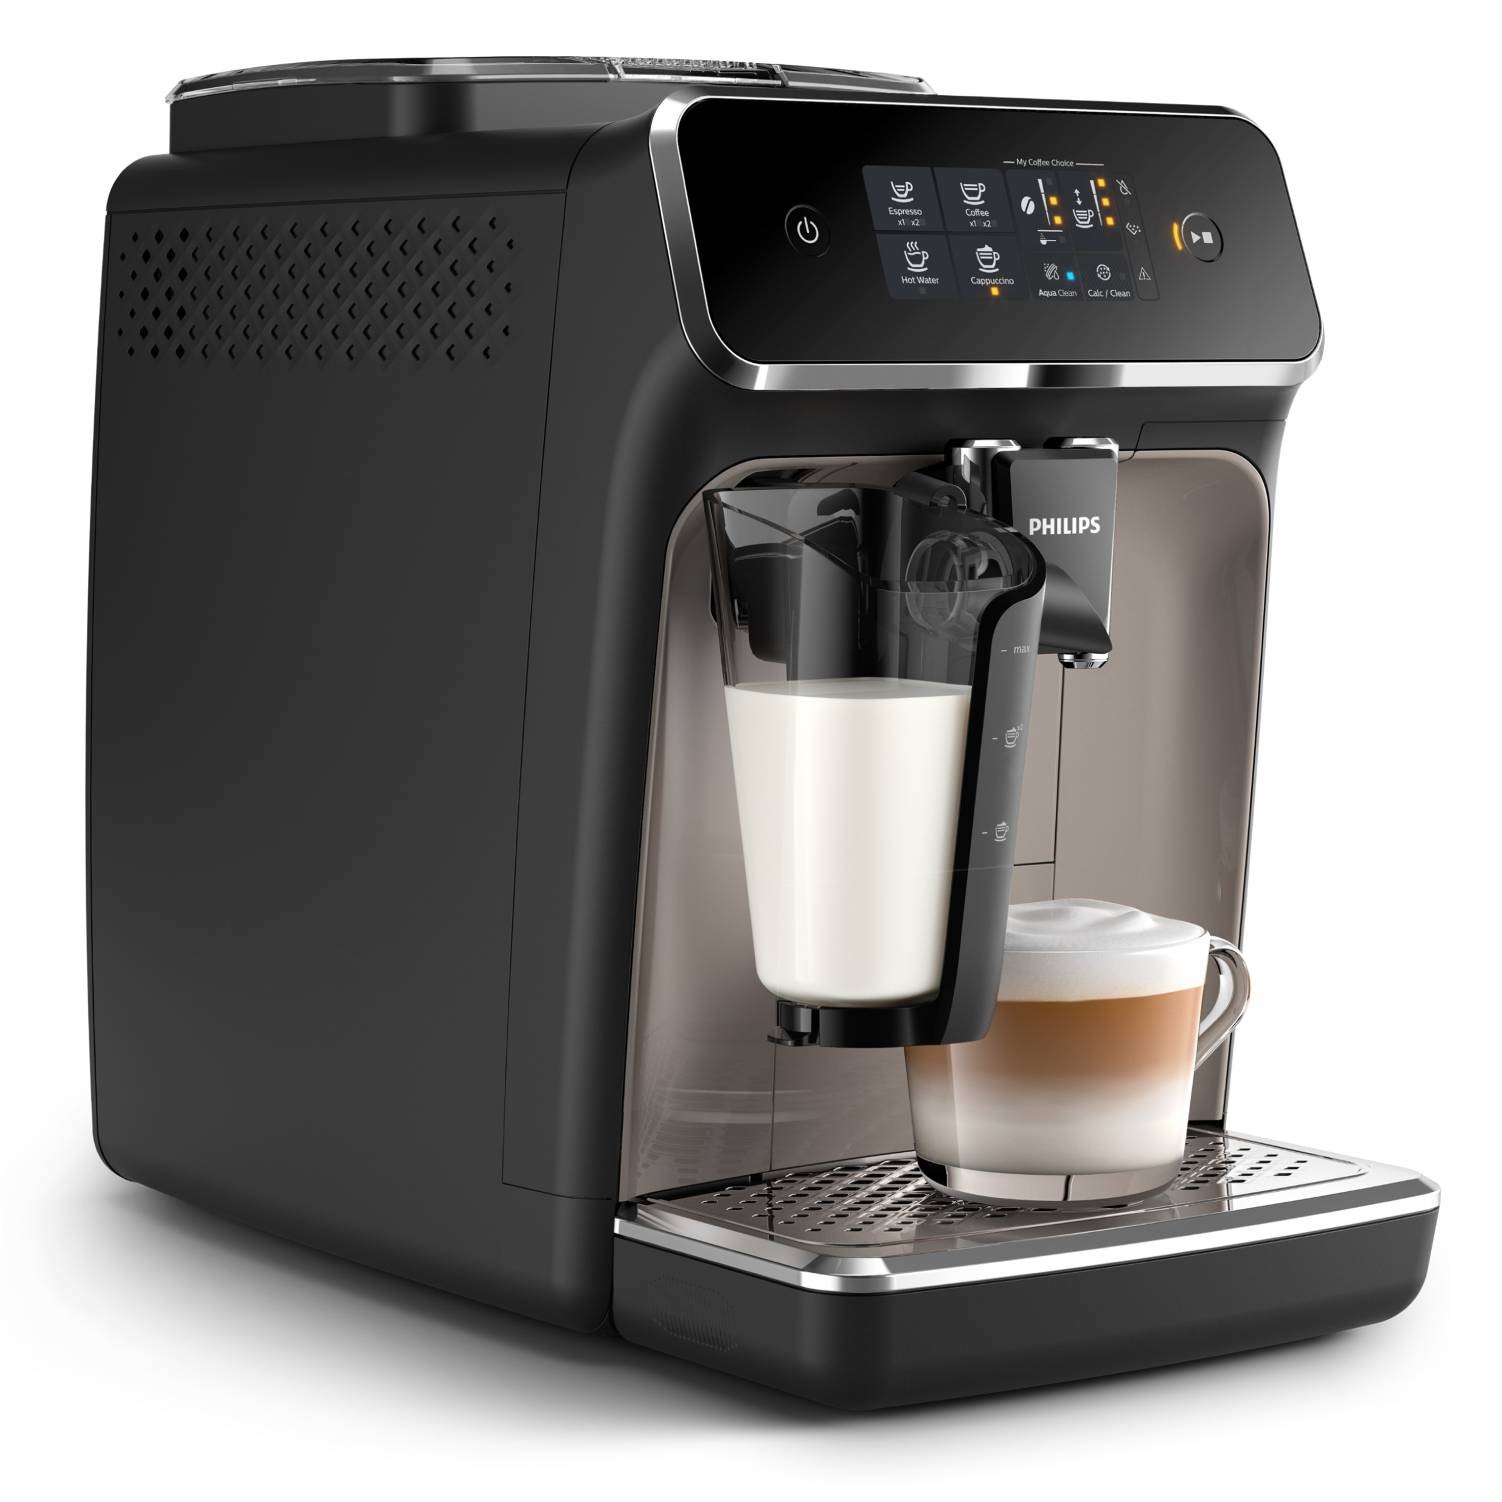 PHILIPS Expresso broyeur